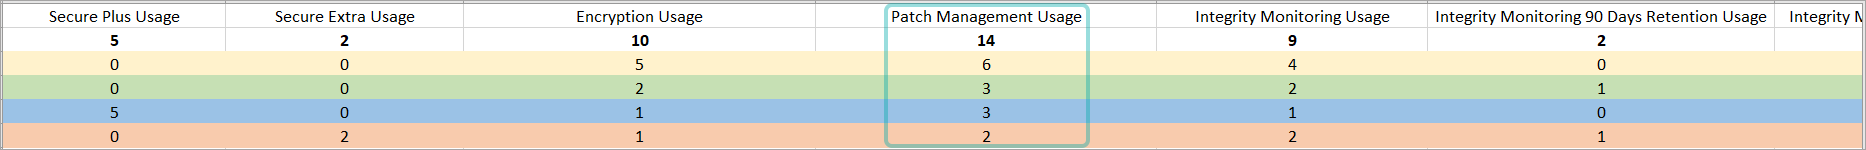 monthly__patchmanagement_usage_340181_en.png